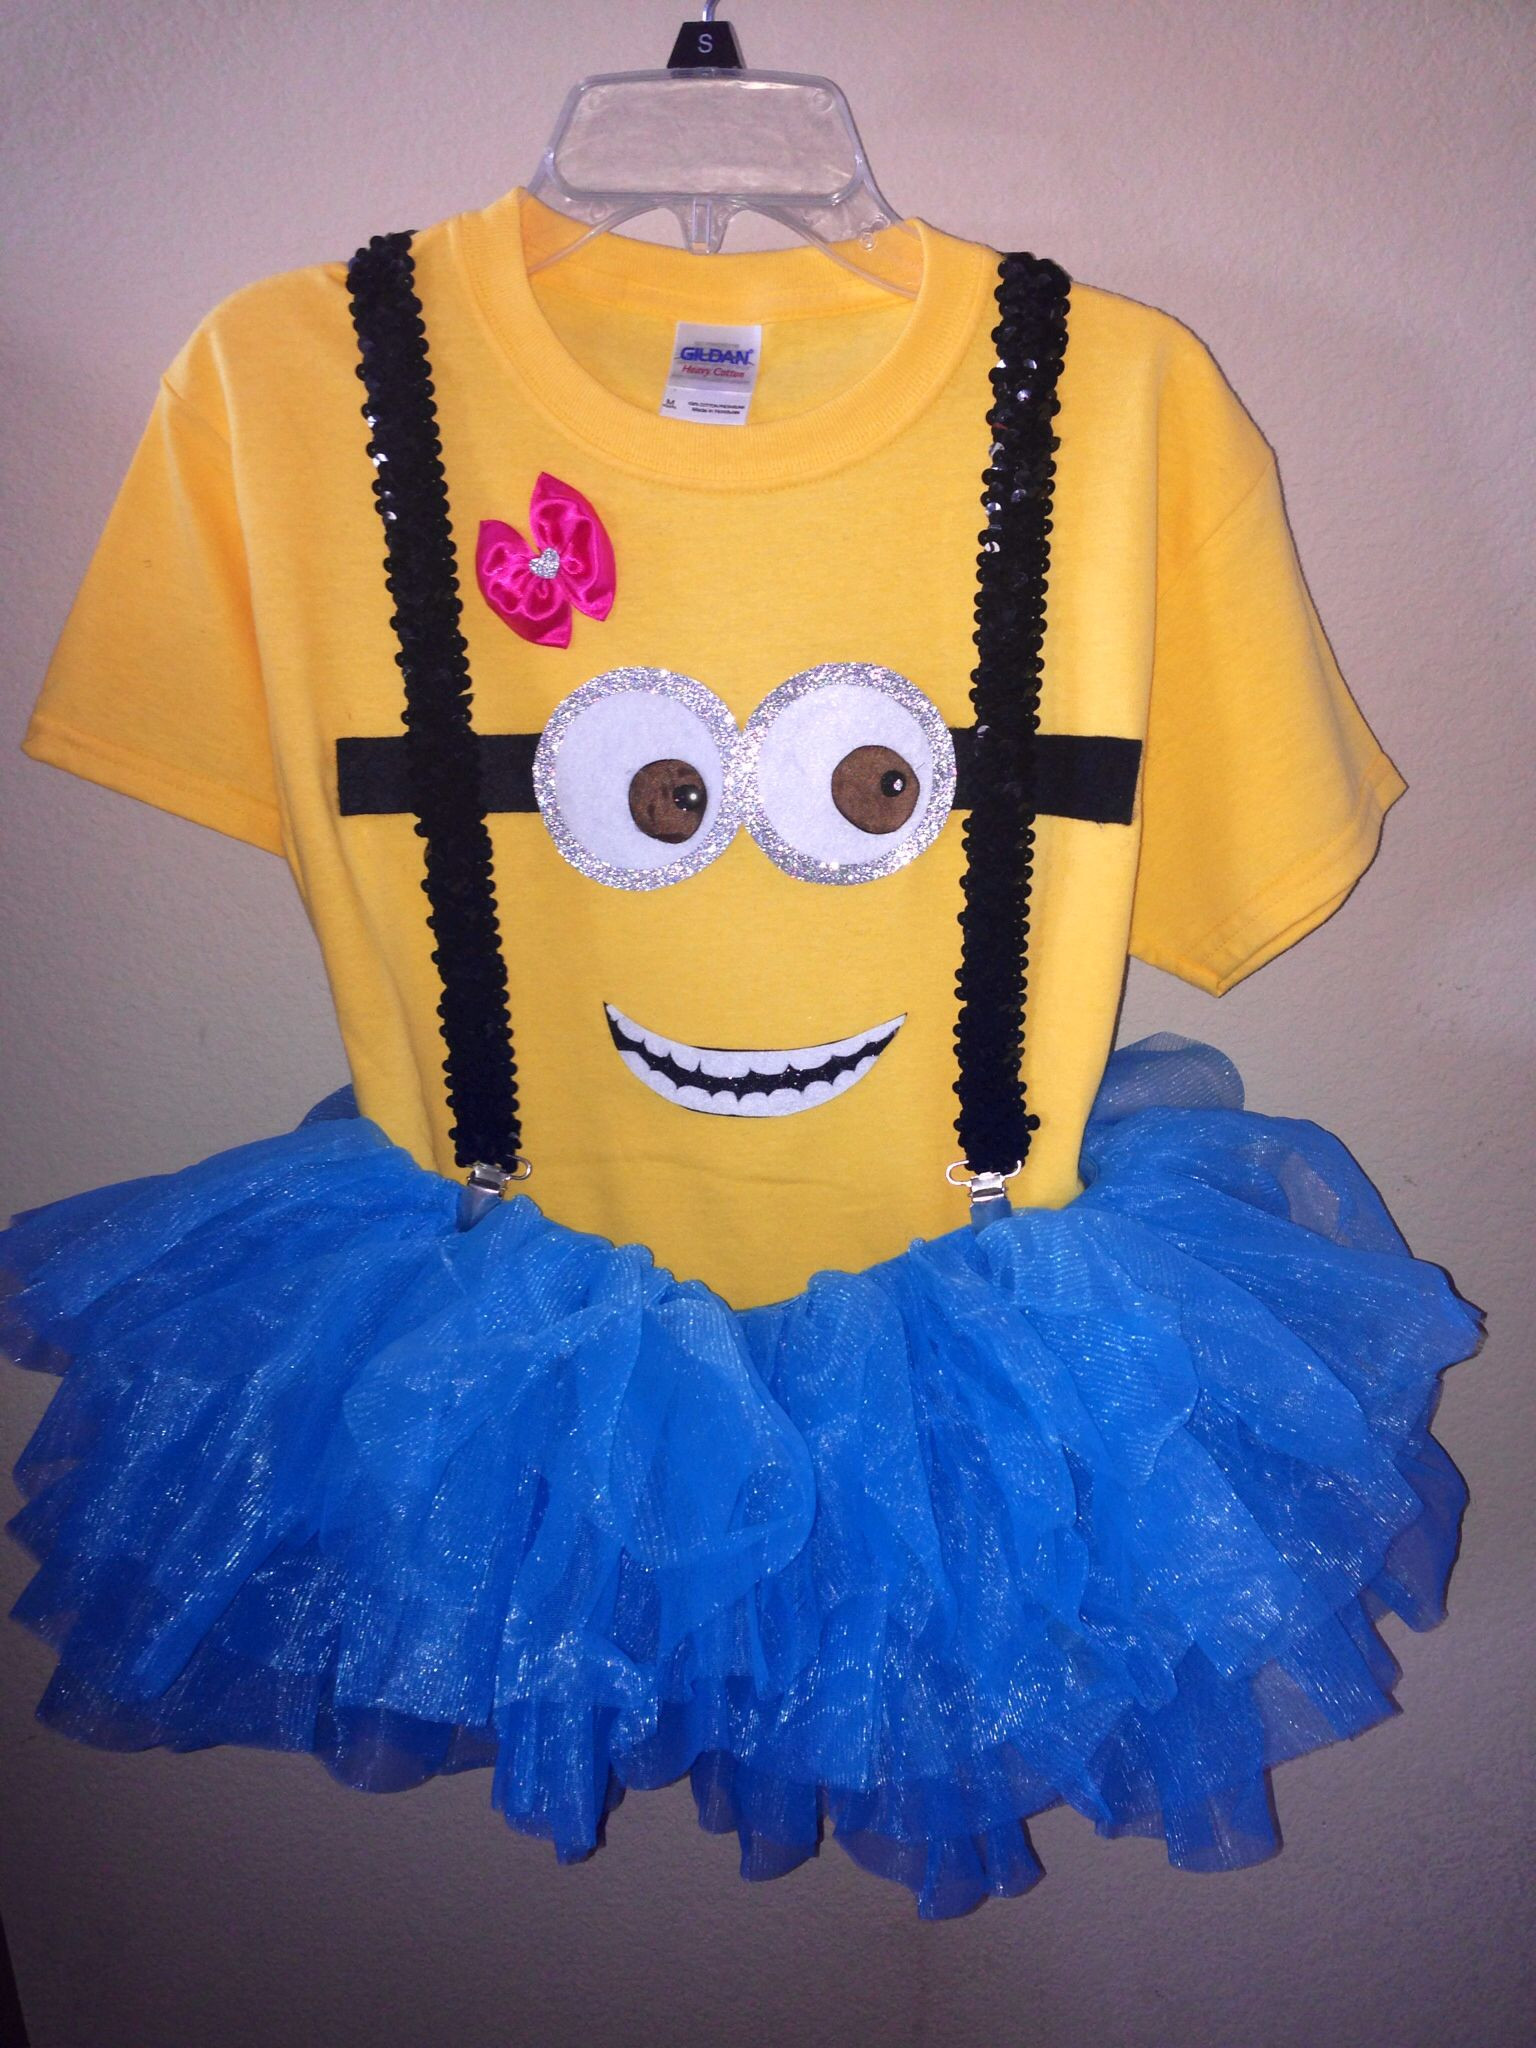 DIY Minion Costume Toddler
 Homemade minion costume For my Living Dolls